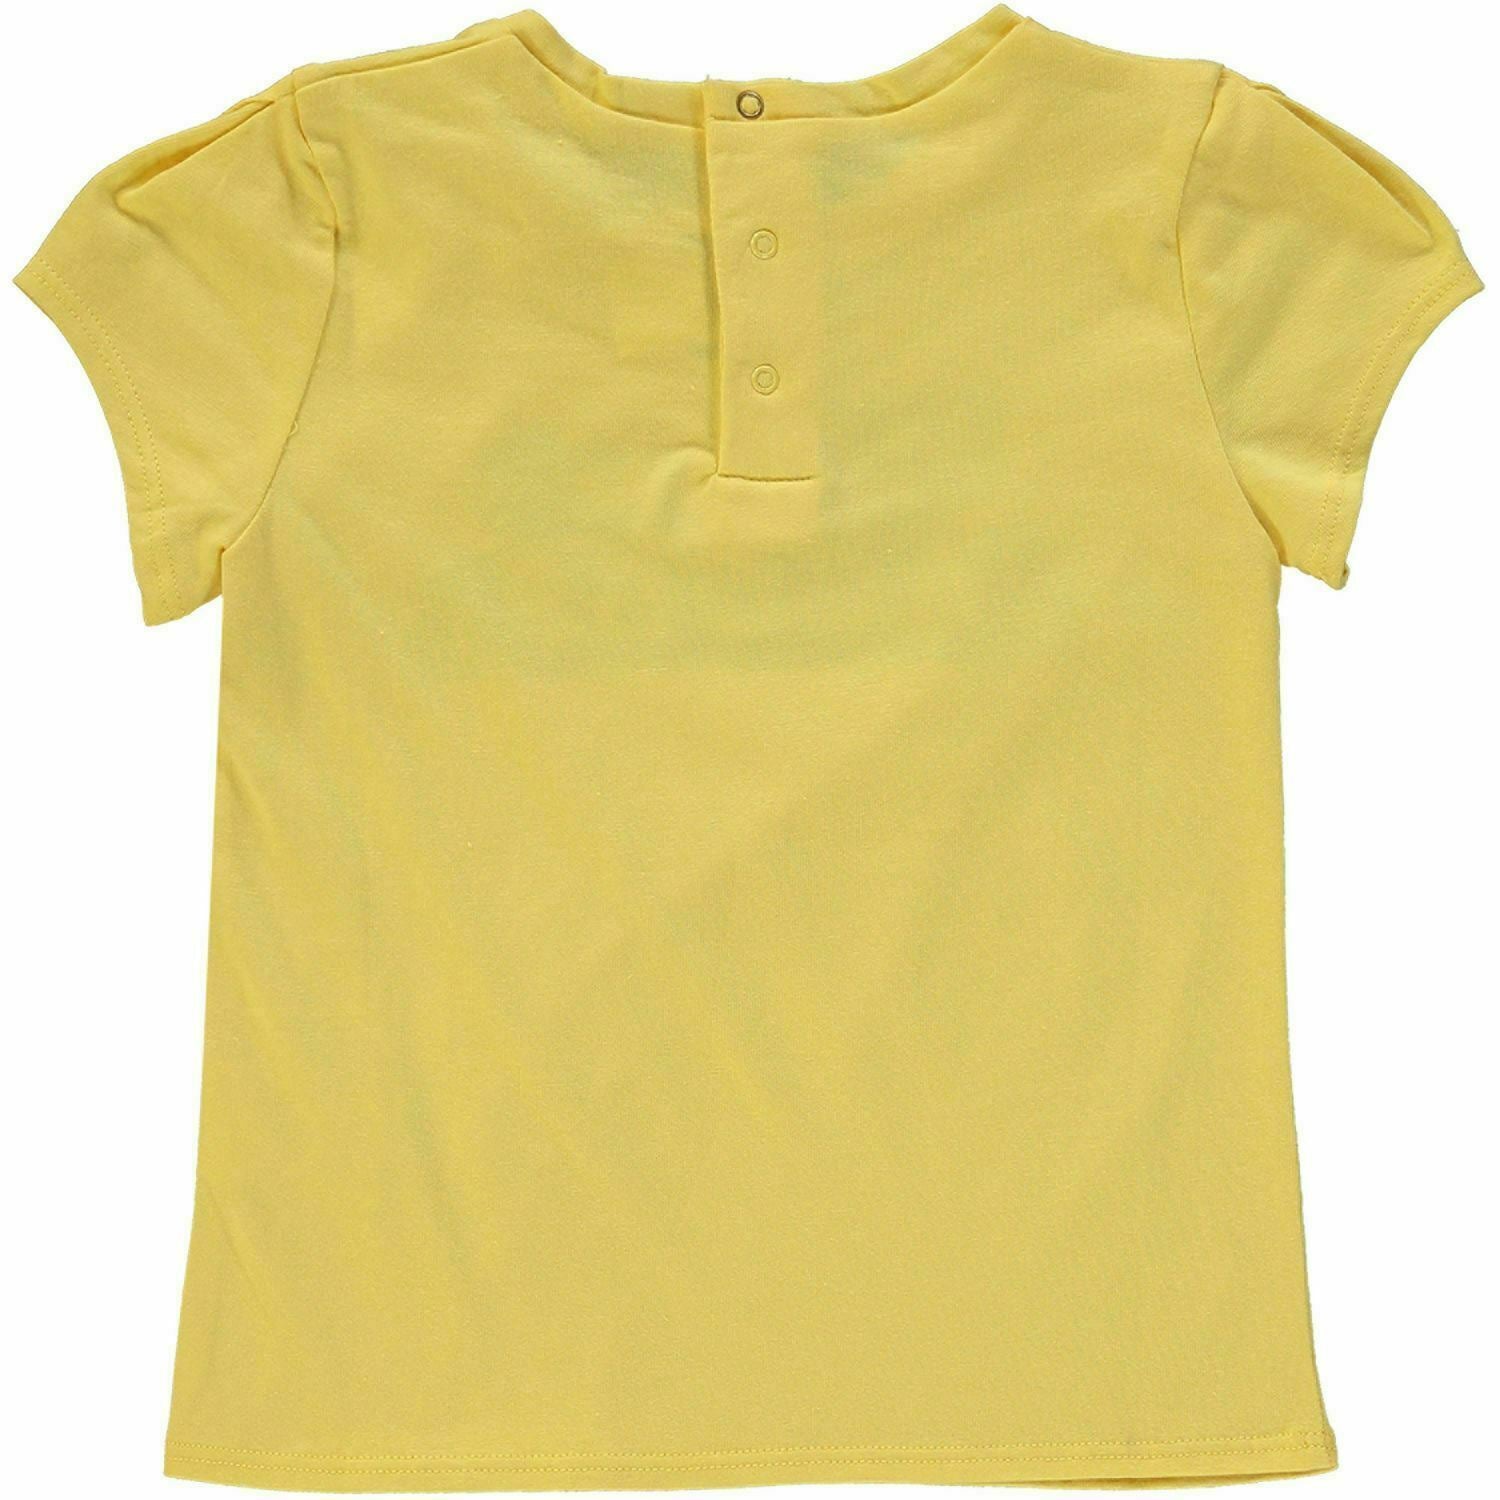 LITTLE MARC JACOBS Baby Girl's Yellow T-Shirt, sizes 18 months /2 years